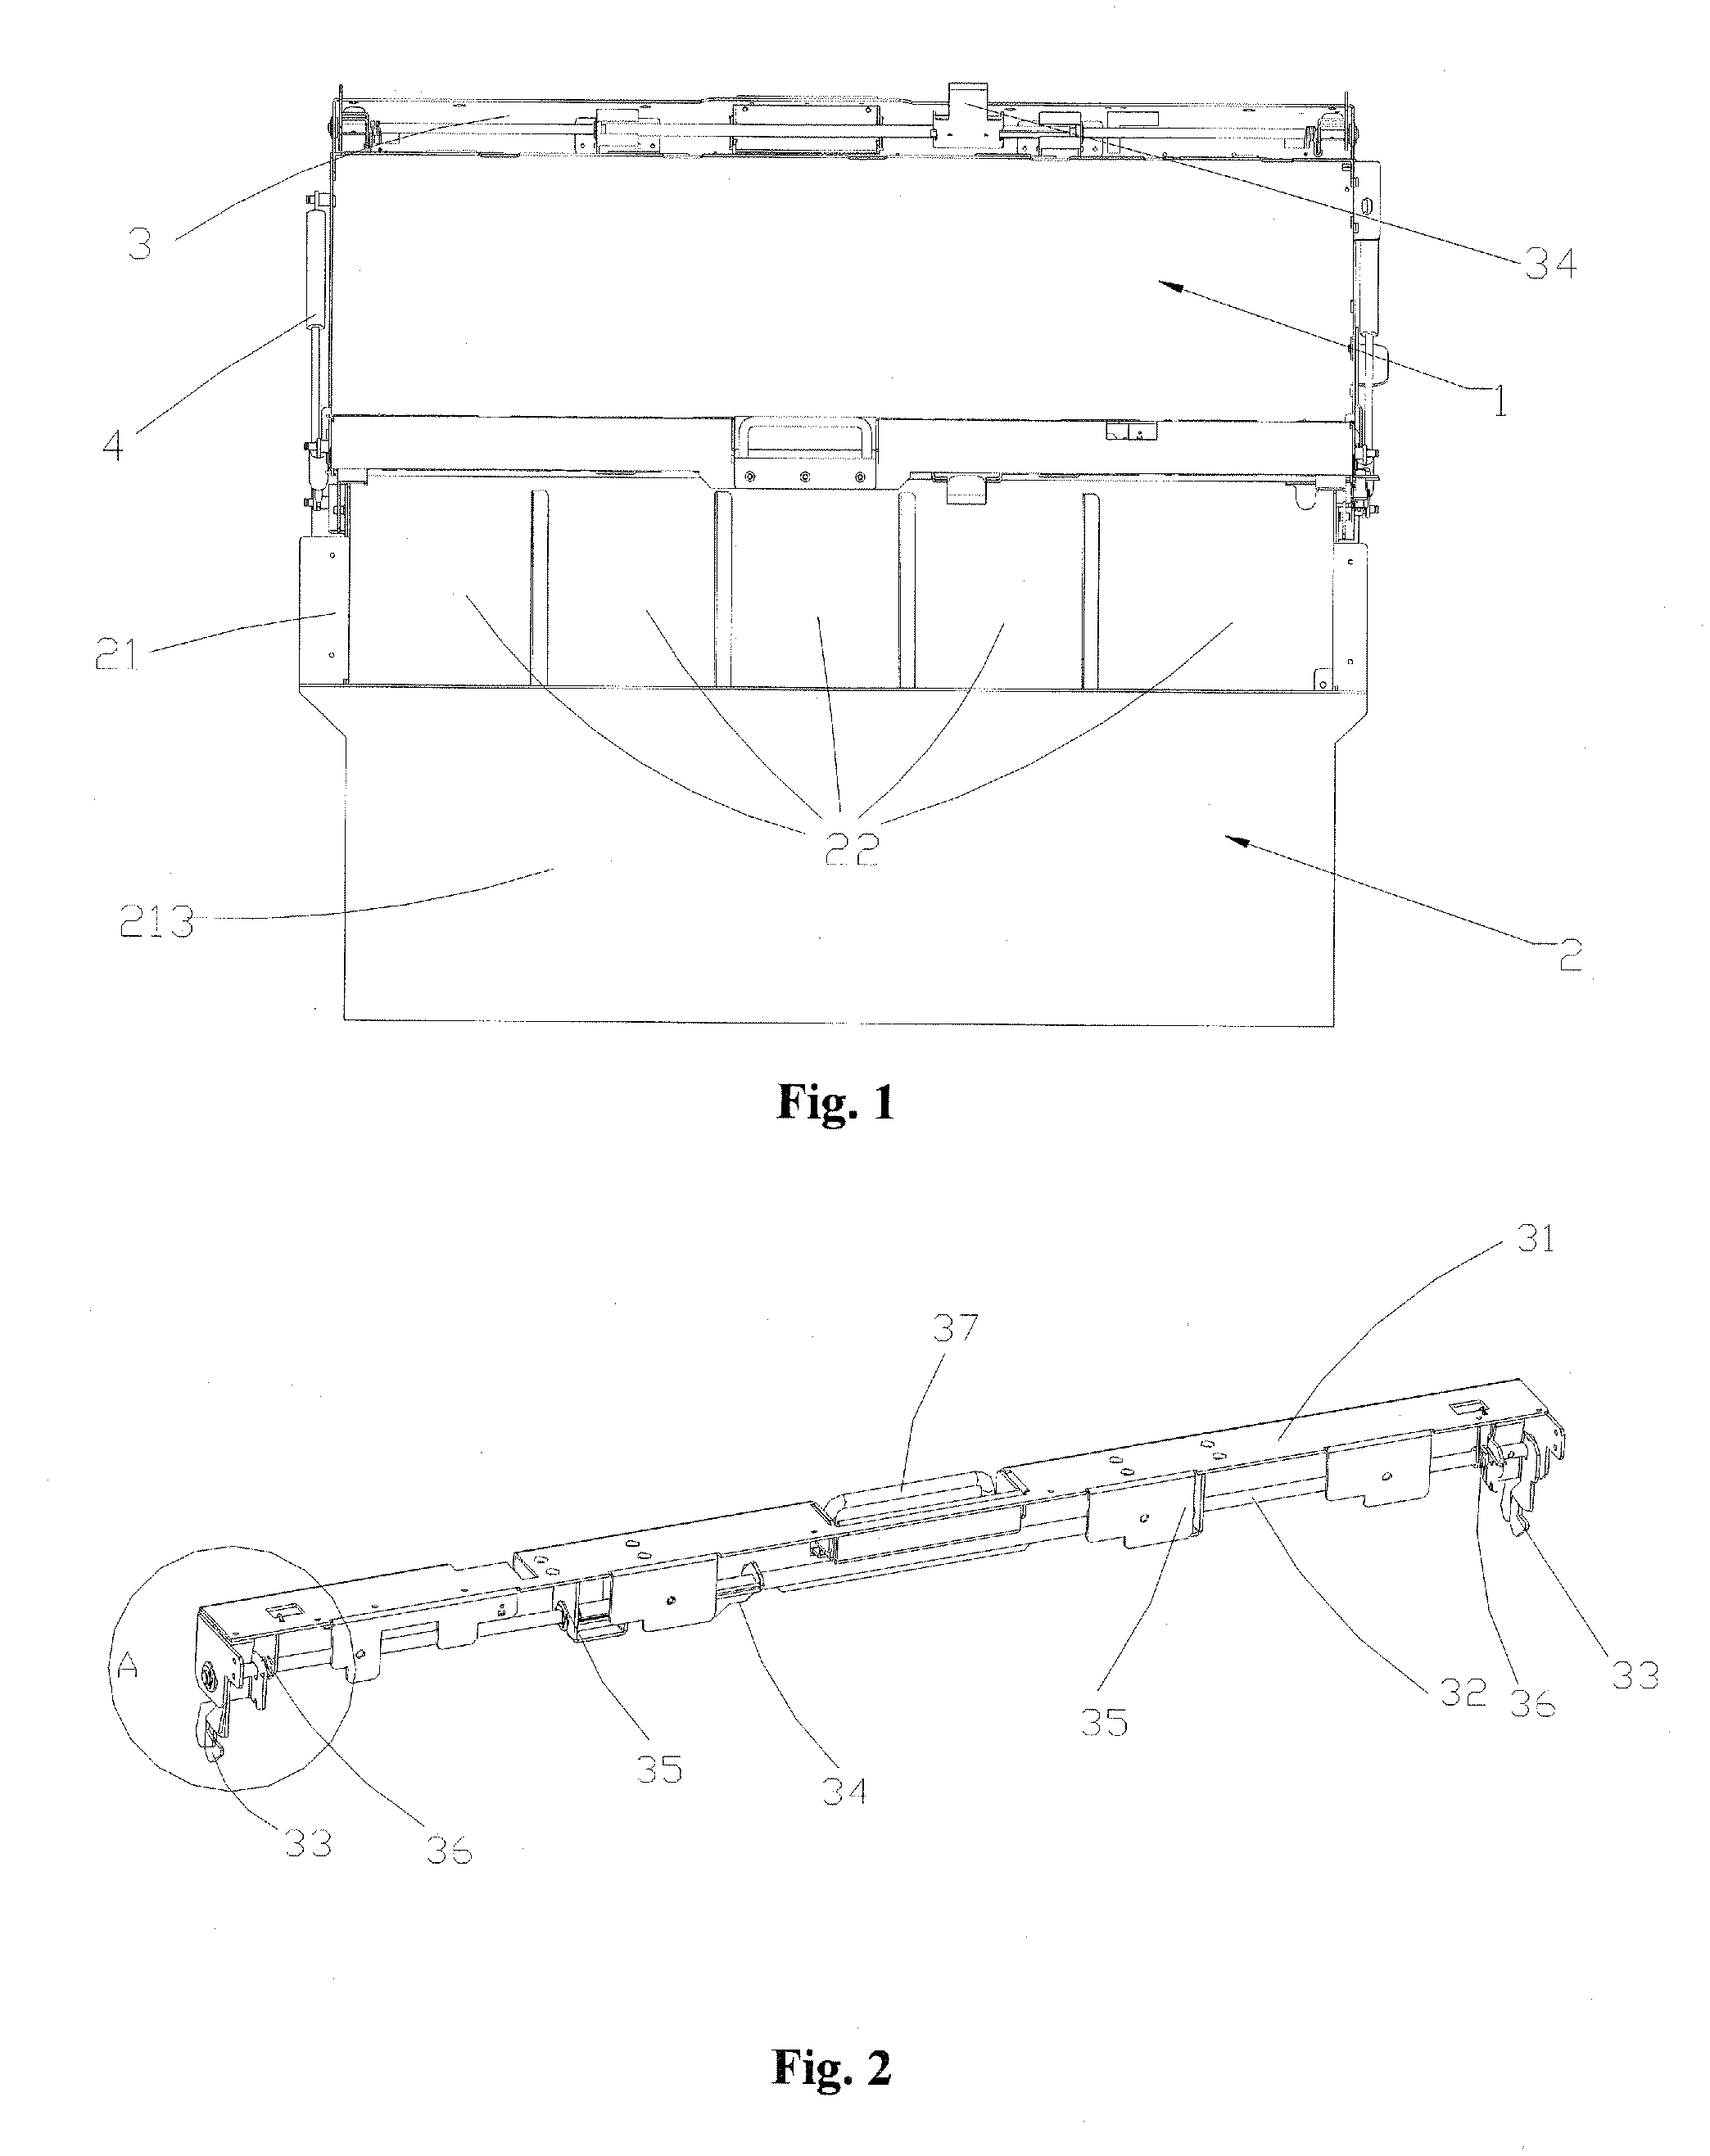 Paper money transmission and storage device